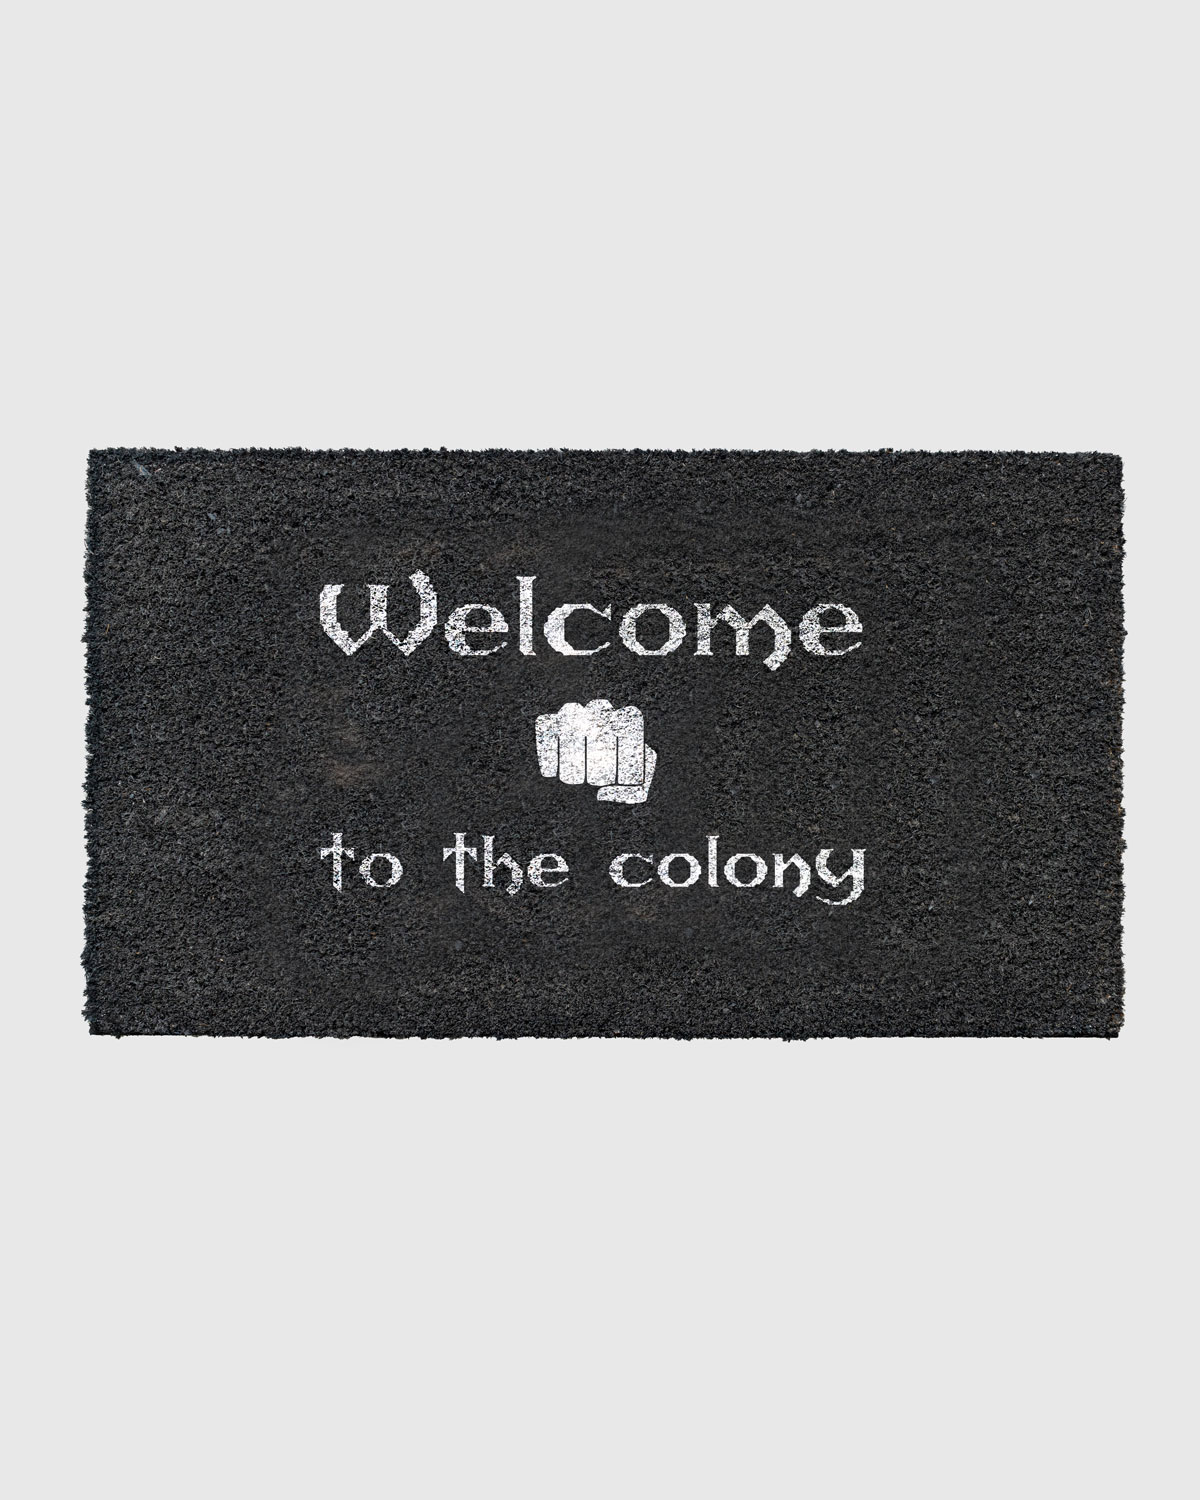 Gothic Doormat Welcome to the Colony